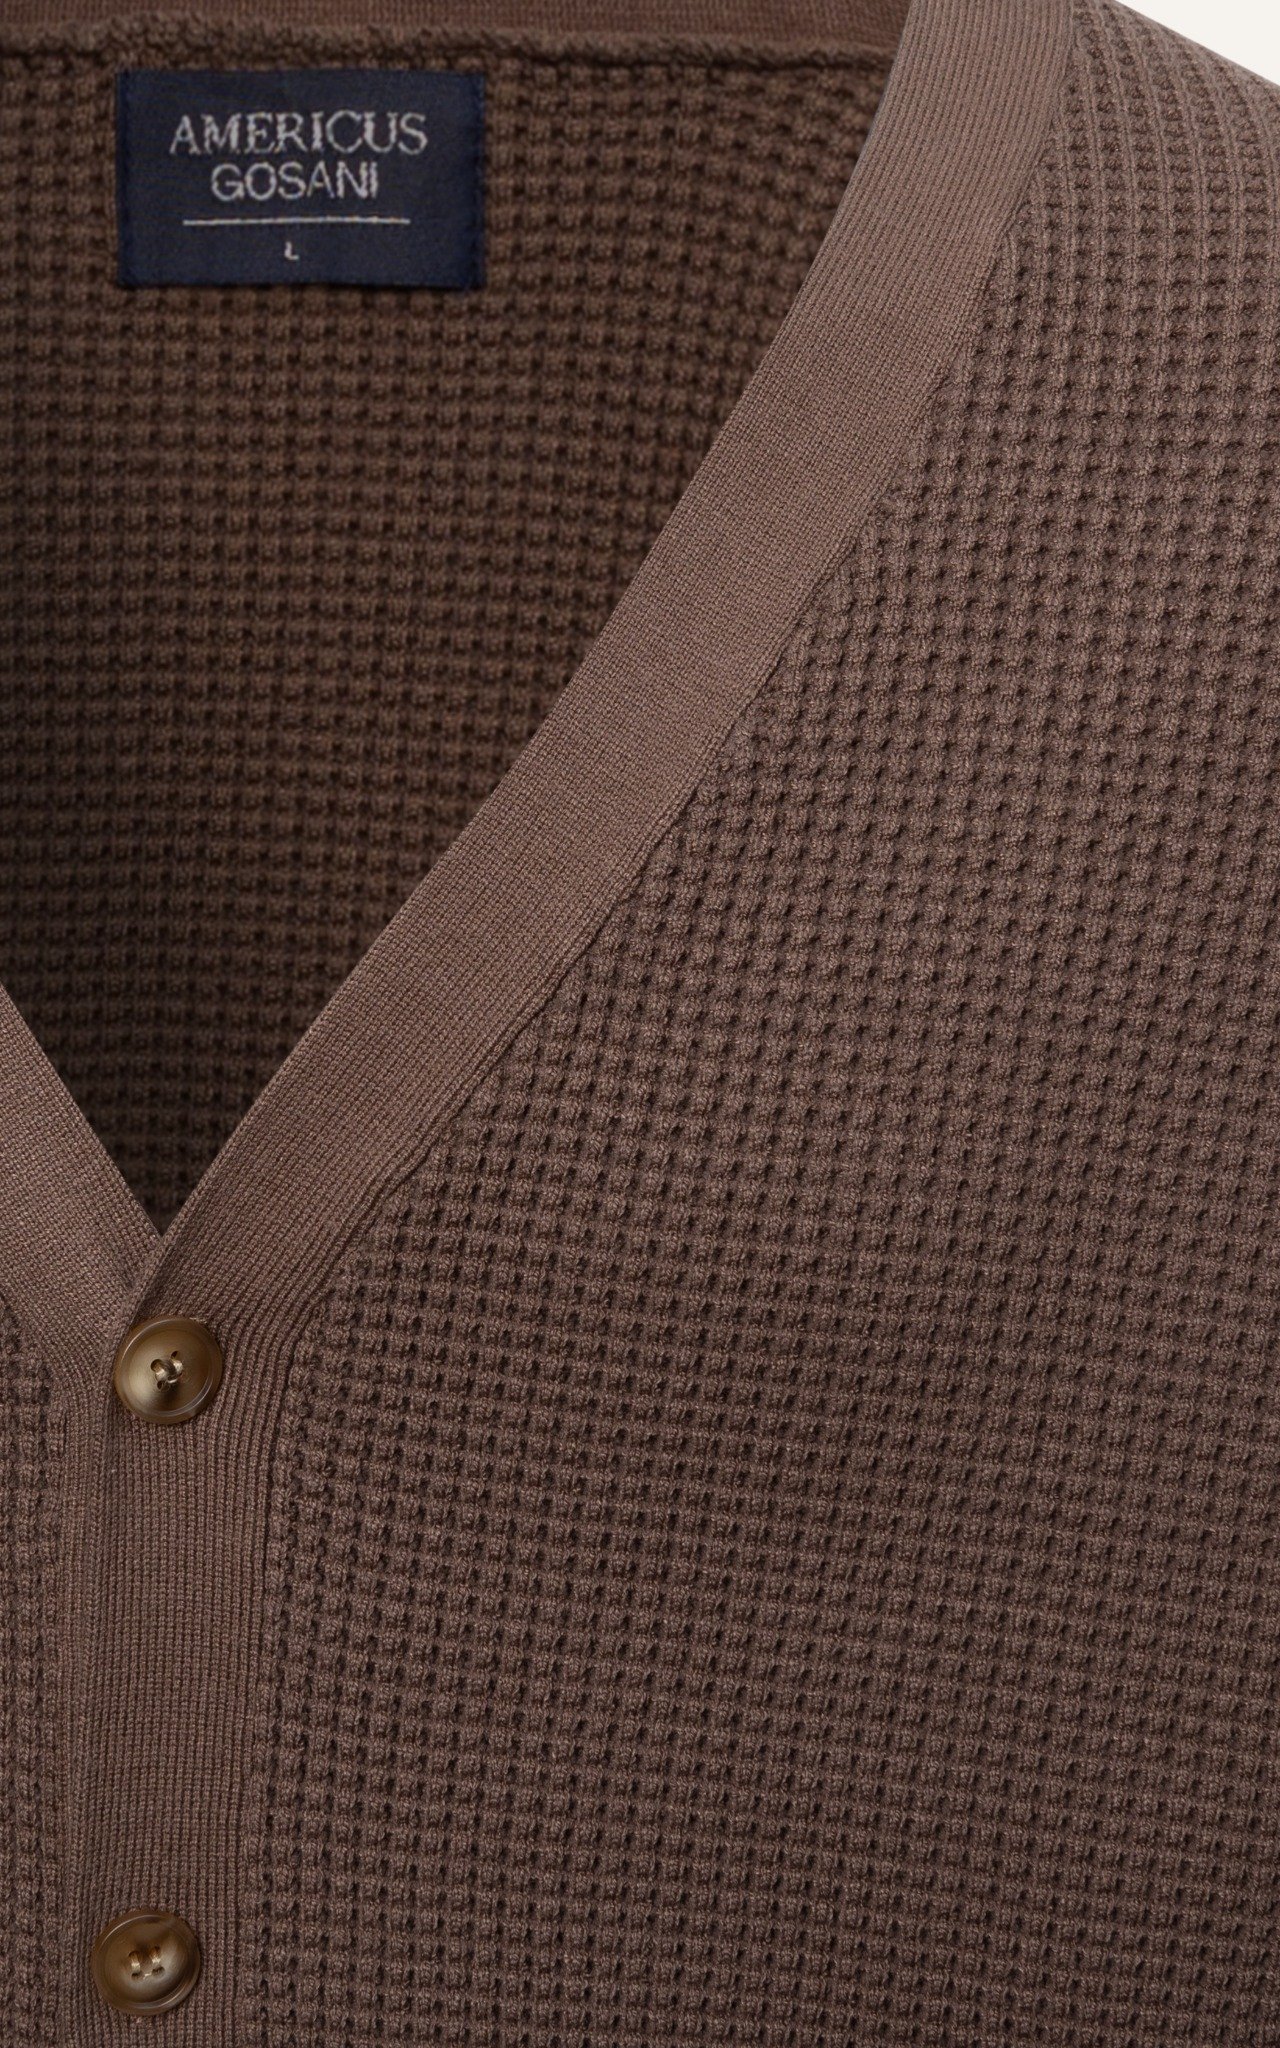 AG714 NEW COLLECTION CARDIGAN IN BROWN